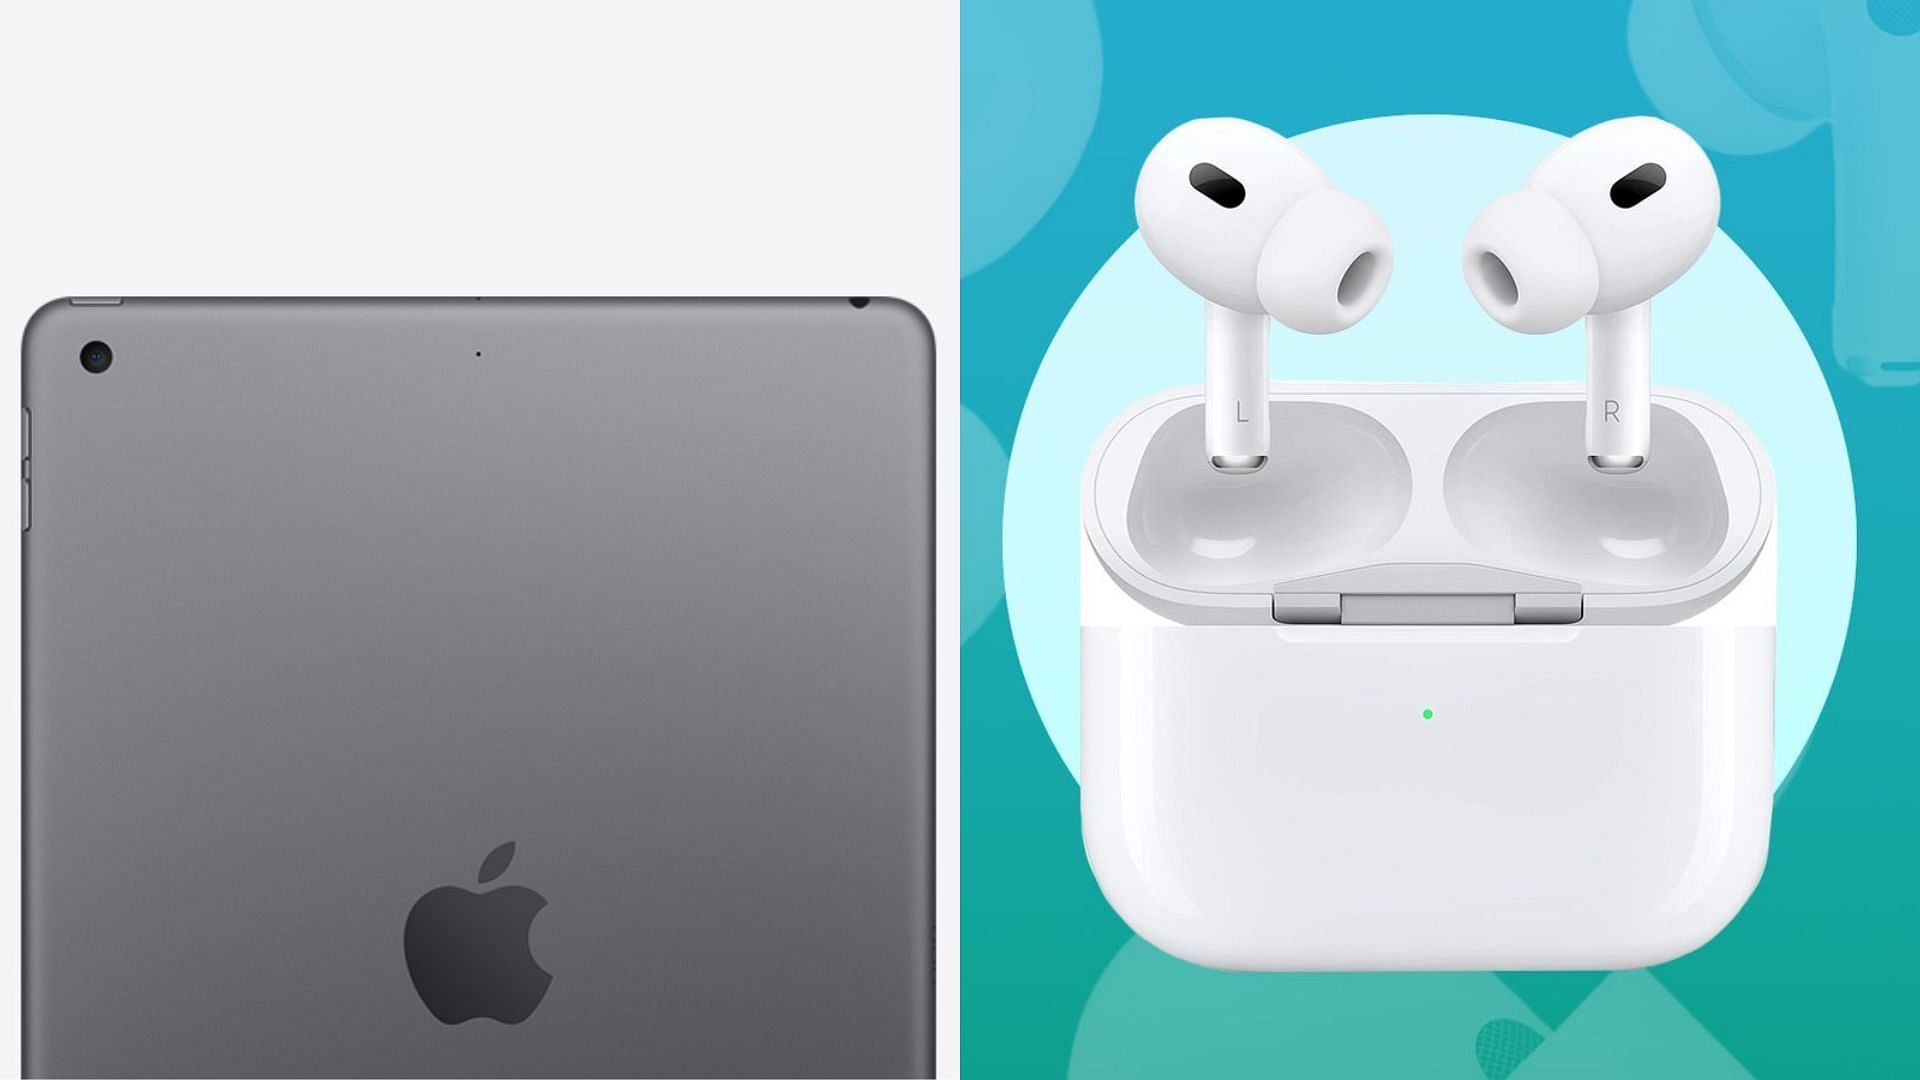 The 9th gen iPad and 2nd gen AirPods have been massively discounted (Image via Apple)